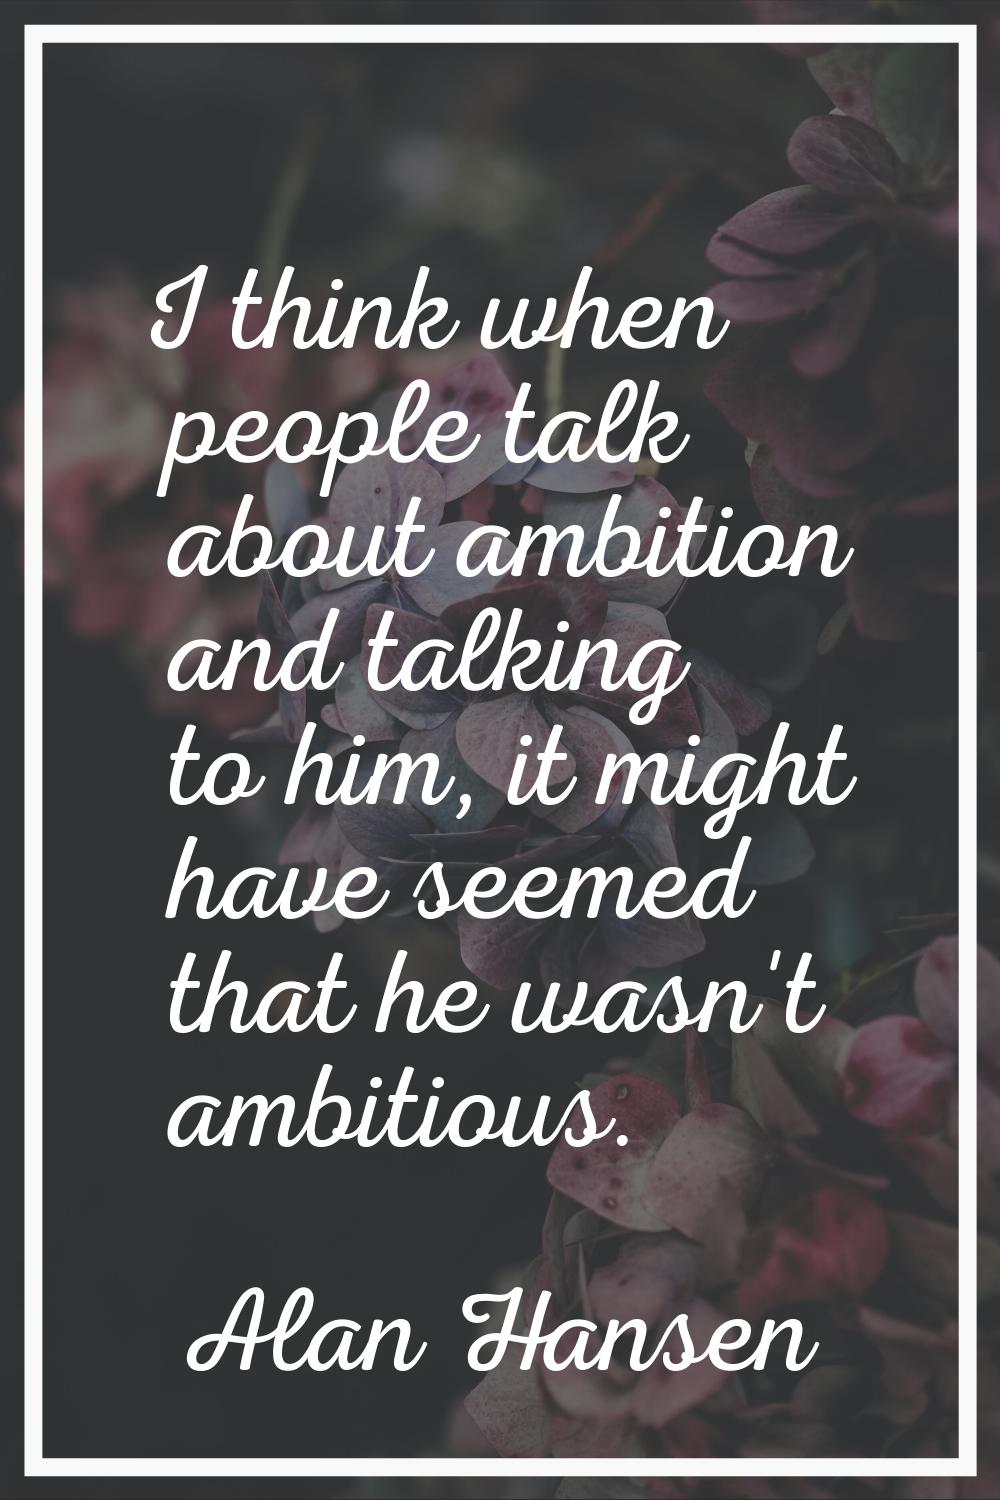 I think when people talk about ambition and talking to him, it might have seemed that he wasn't amb